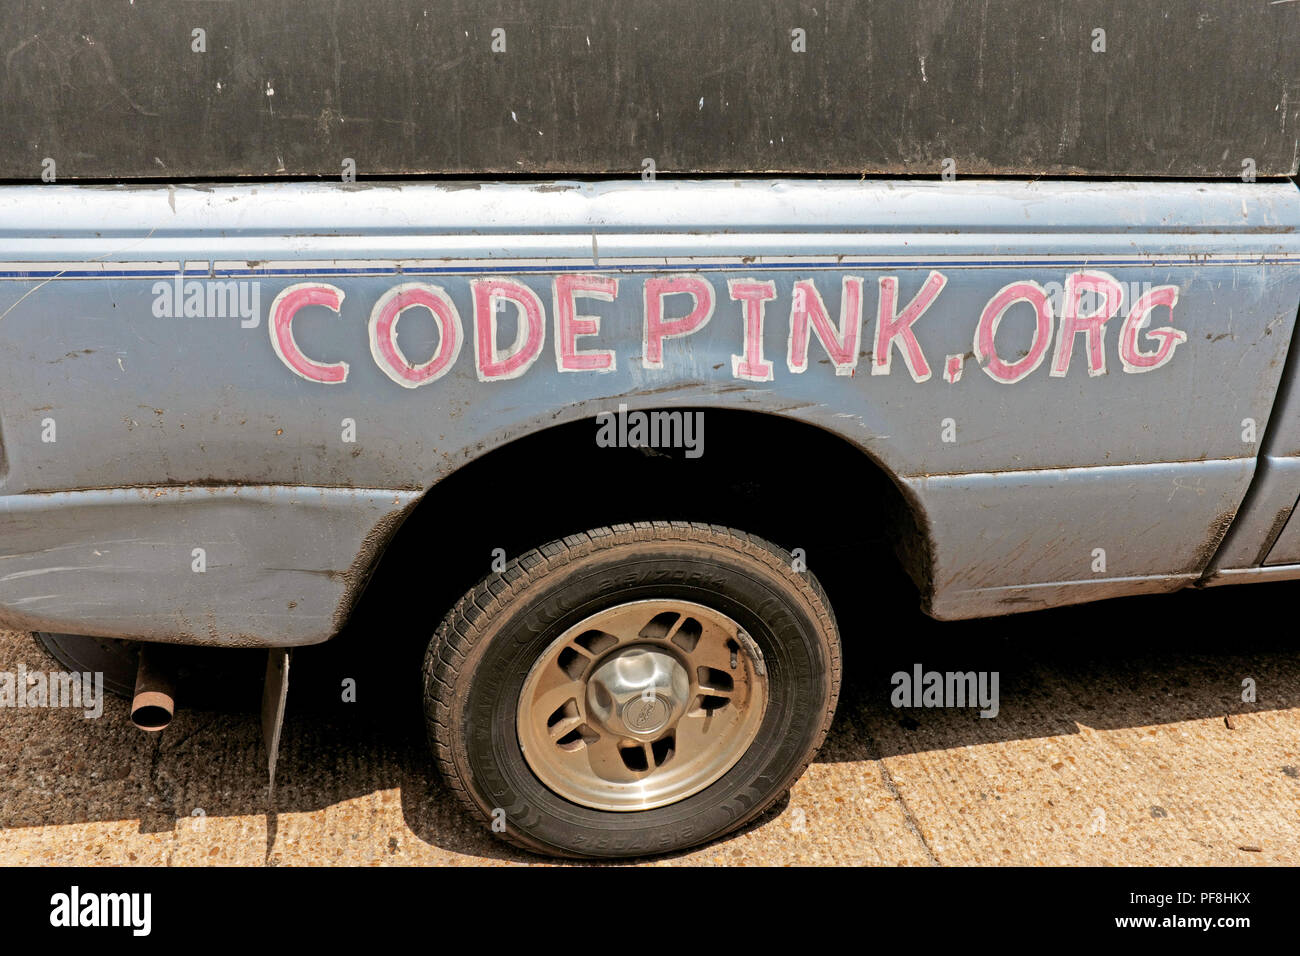 Started in 2002 to demonstrate against the US invasion in Iraq, Codepink became a worldwide feminist organization focused on peace and the social good. Stock Photo